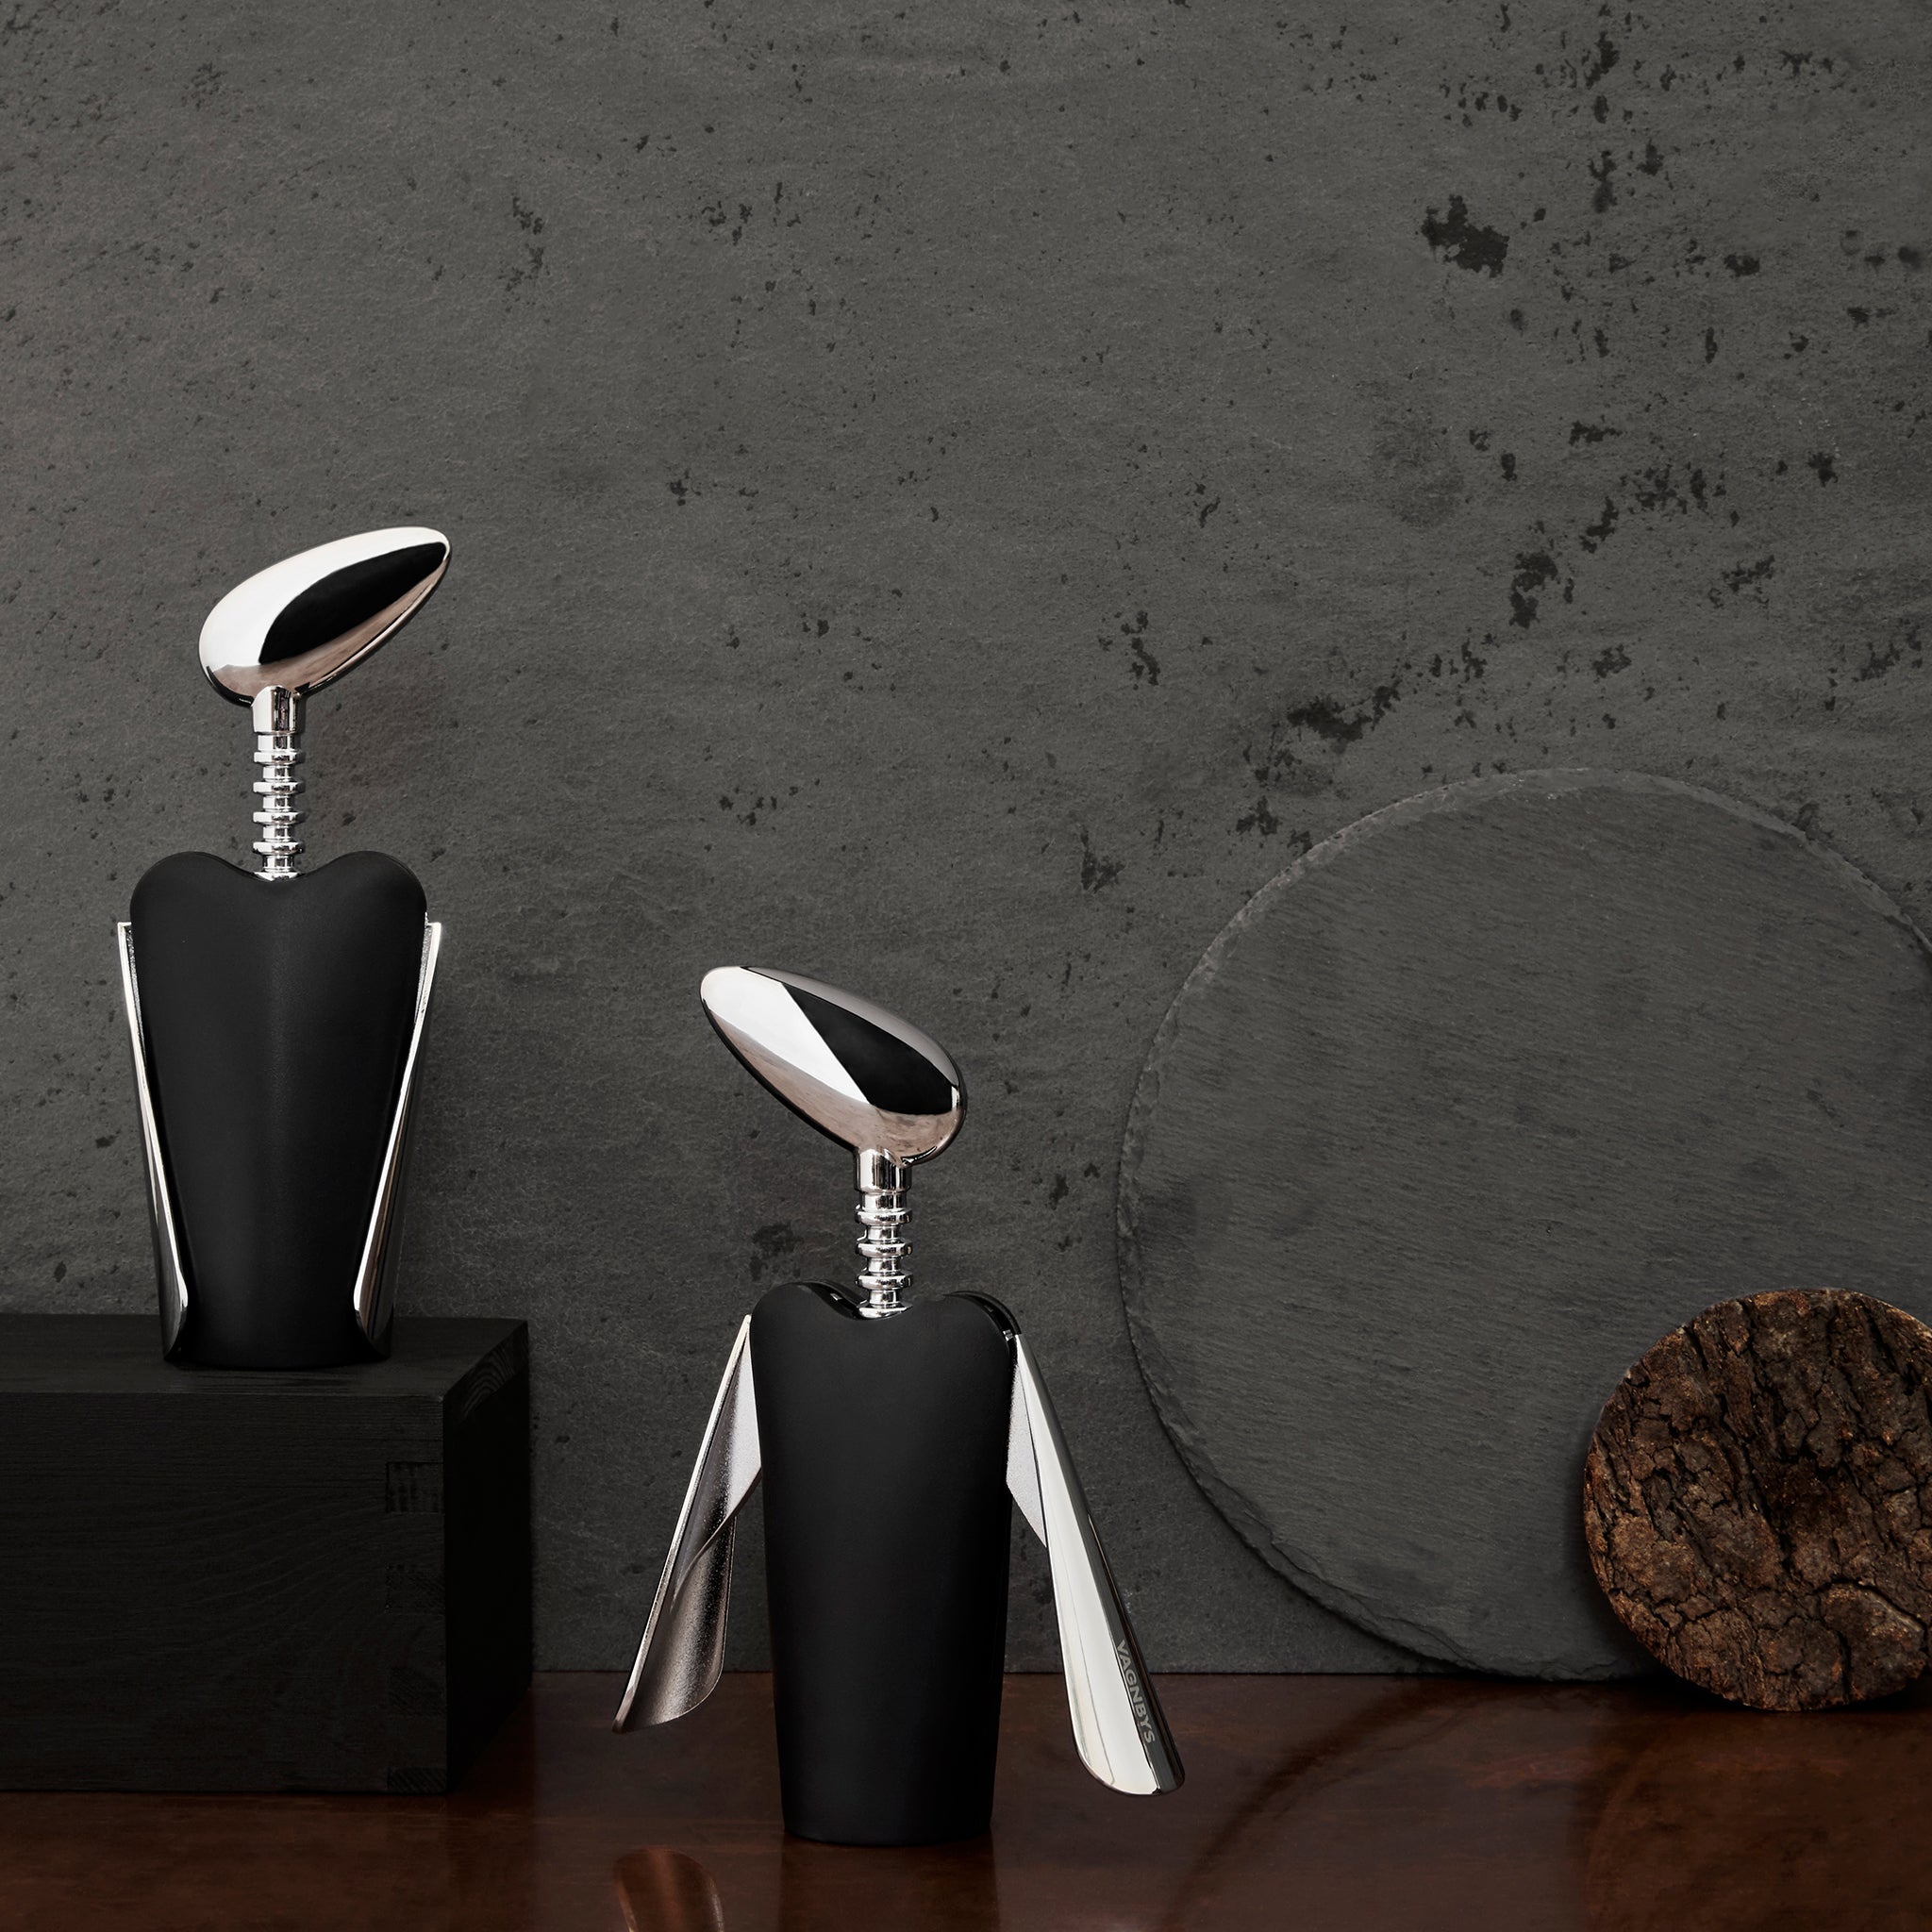  Vagnbys® 'Wings' Corkscrew by Ethan+Ashe Ethan+Ashe Perfumarie